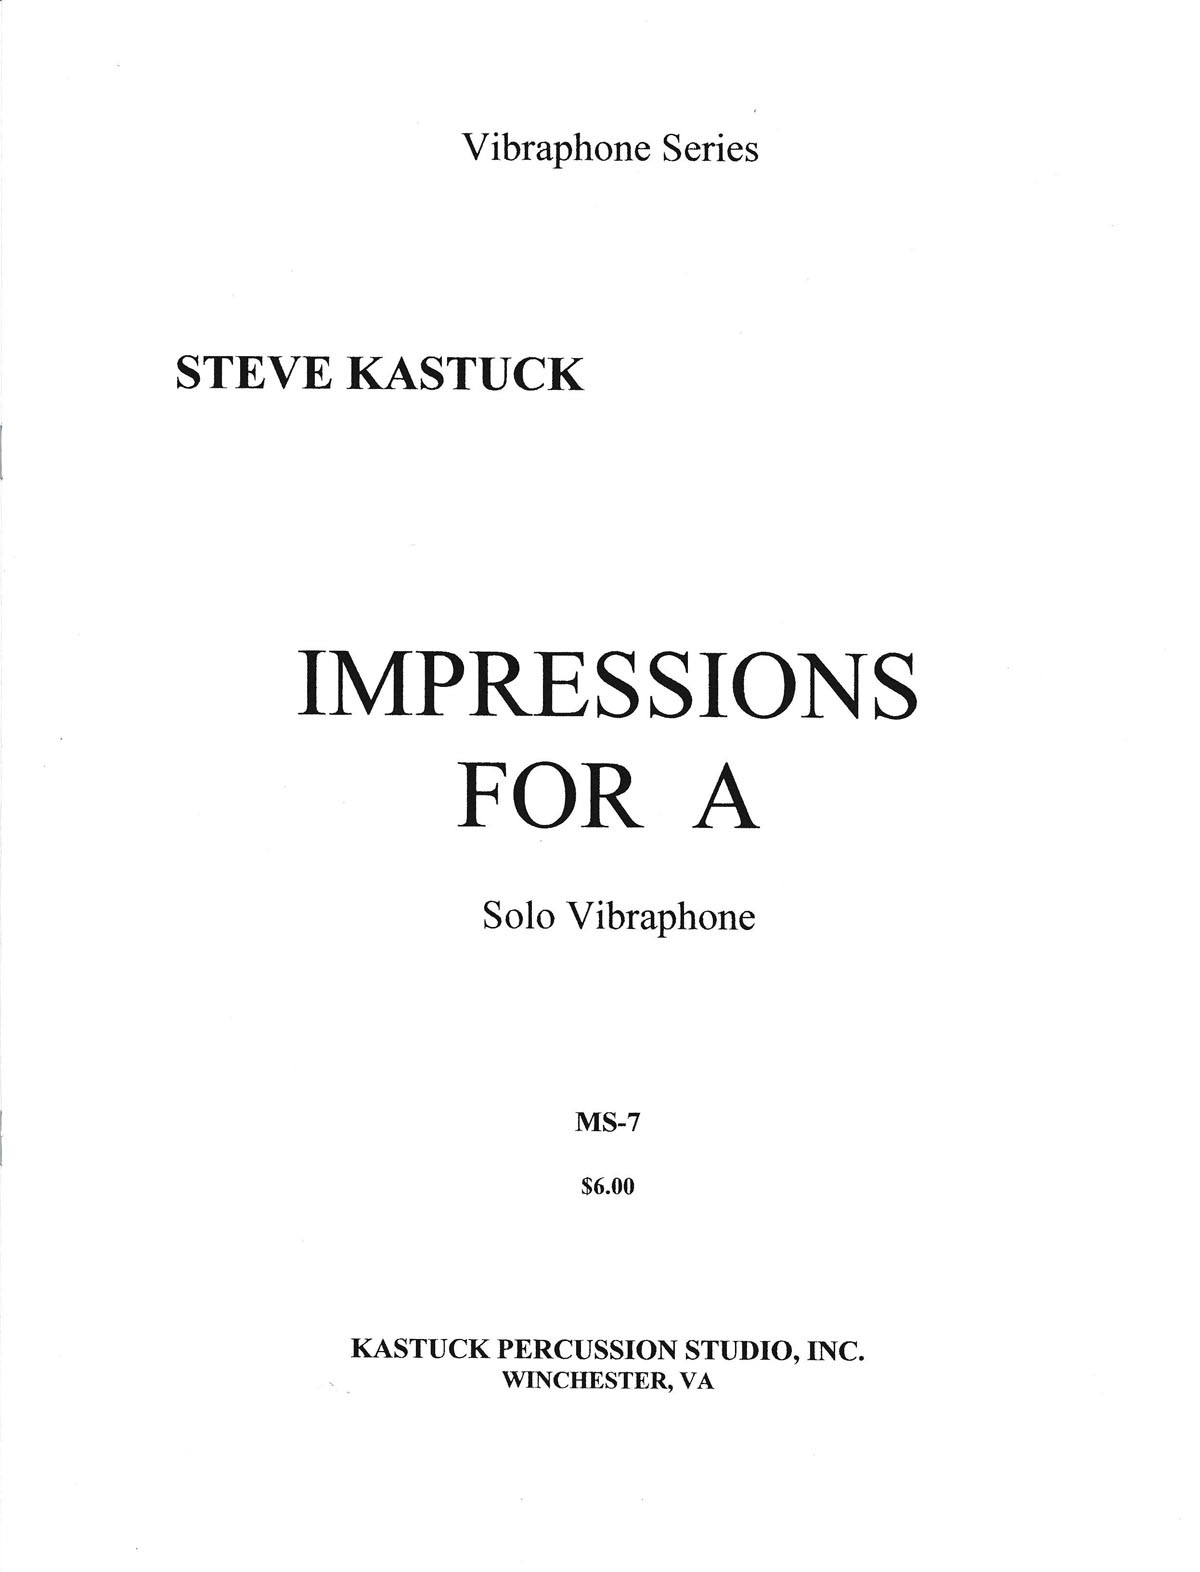 Impressions for A by Steve Kastuck